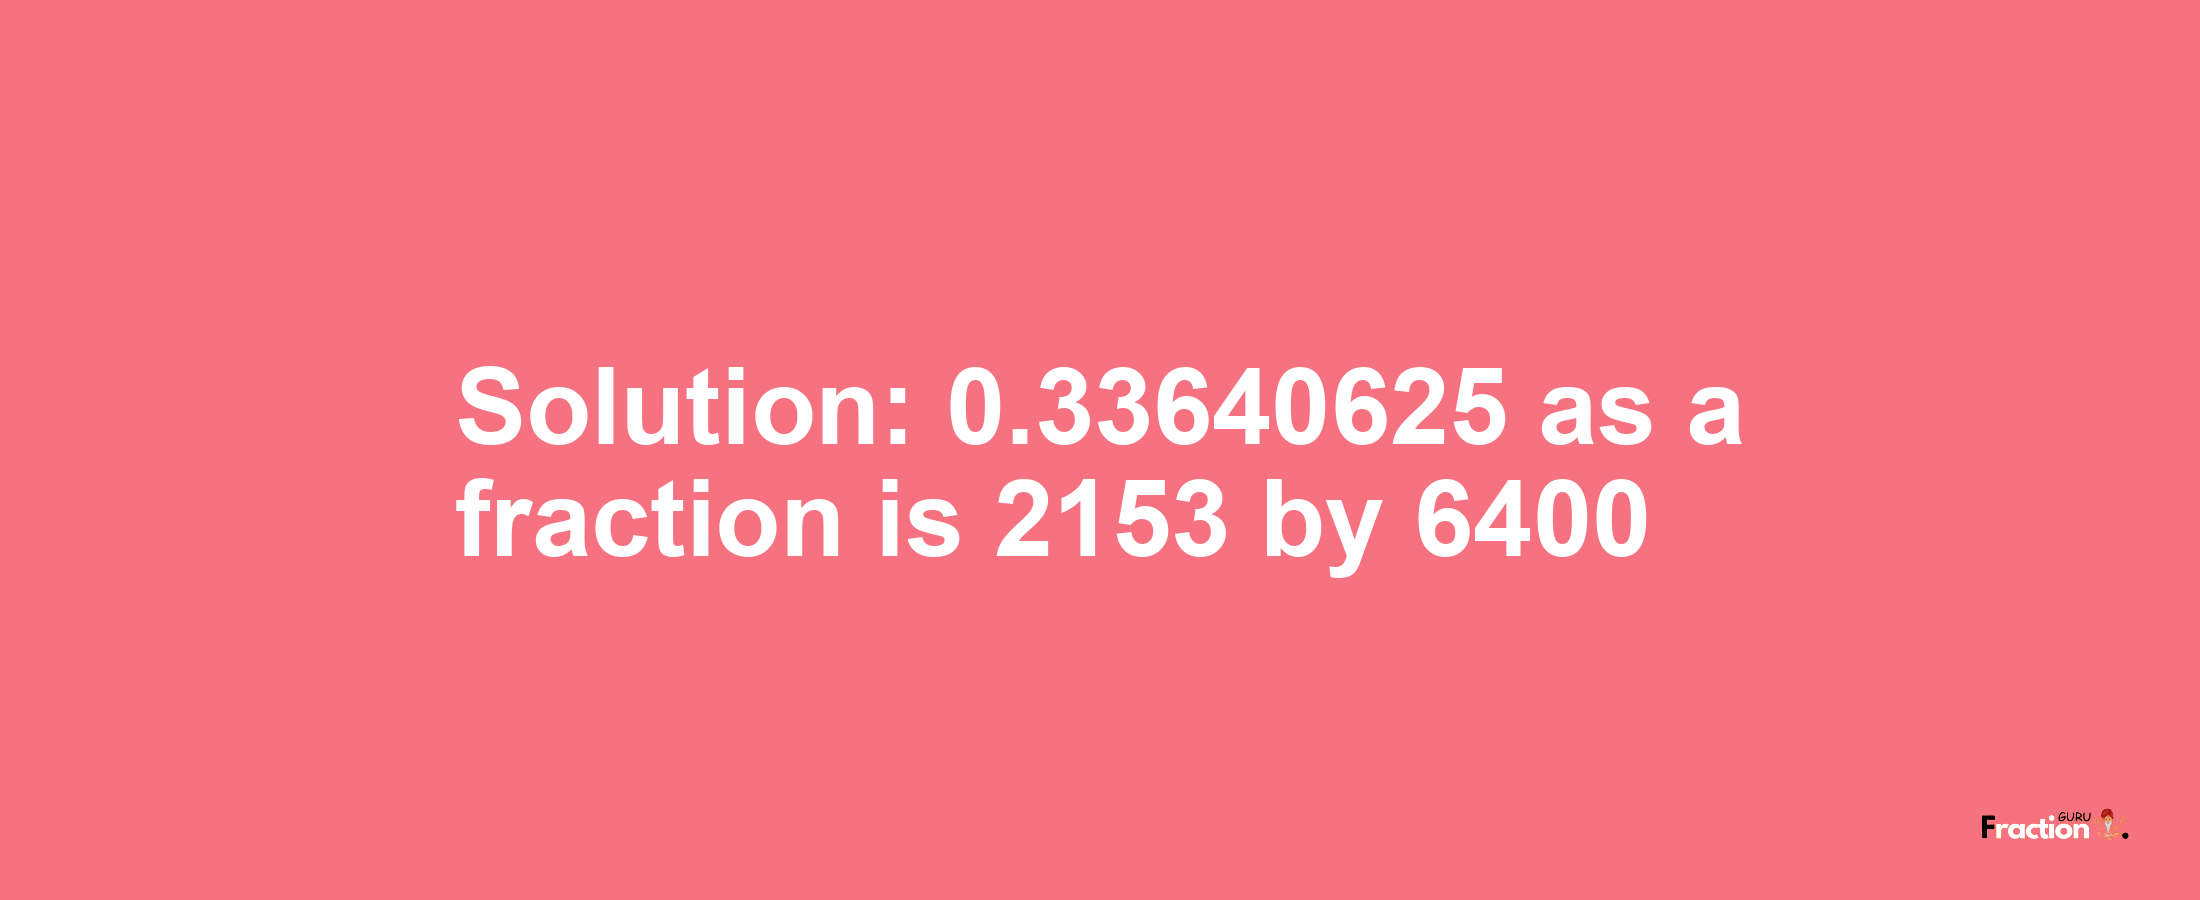 Solution:0.33640625 as a fraction is 2153/6400